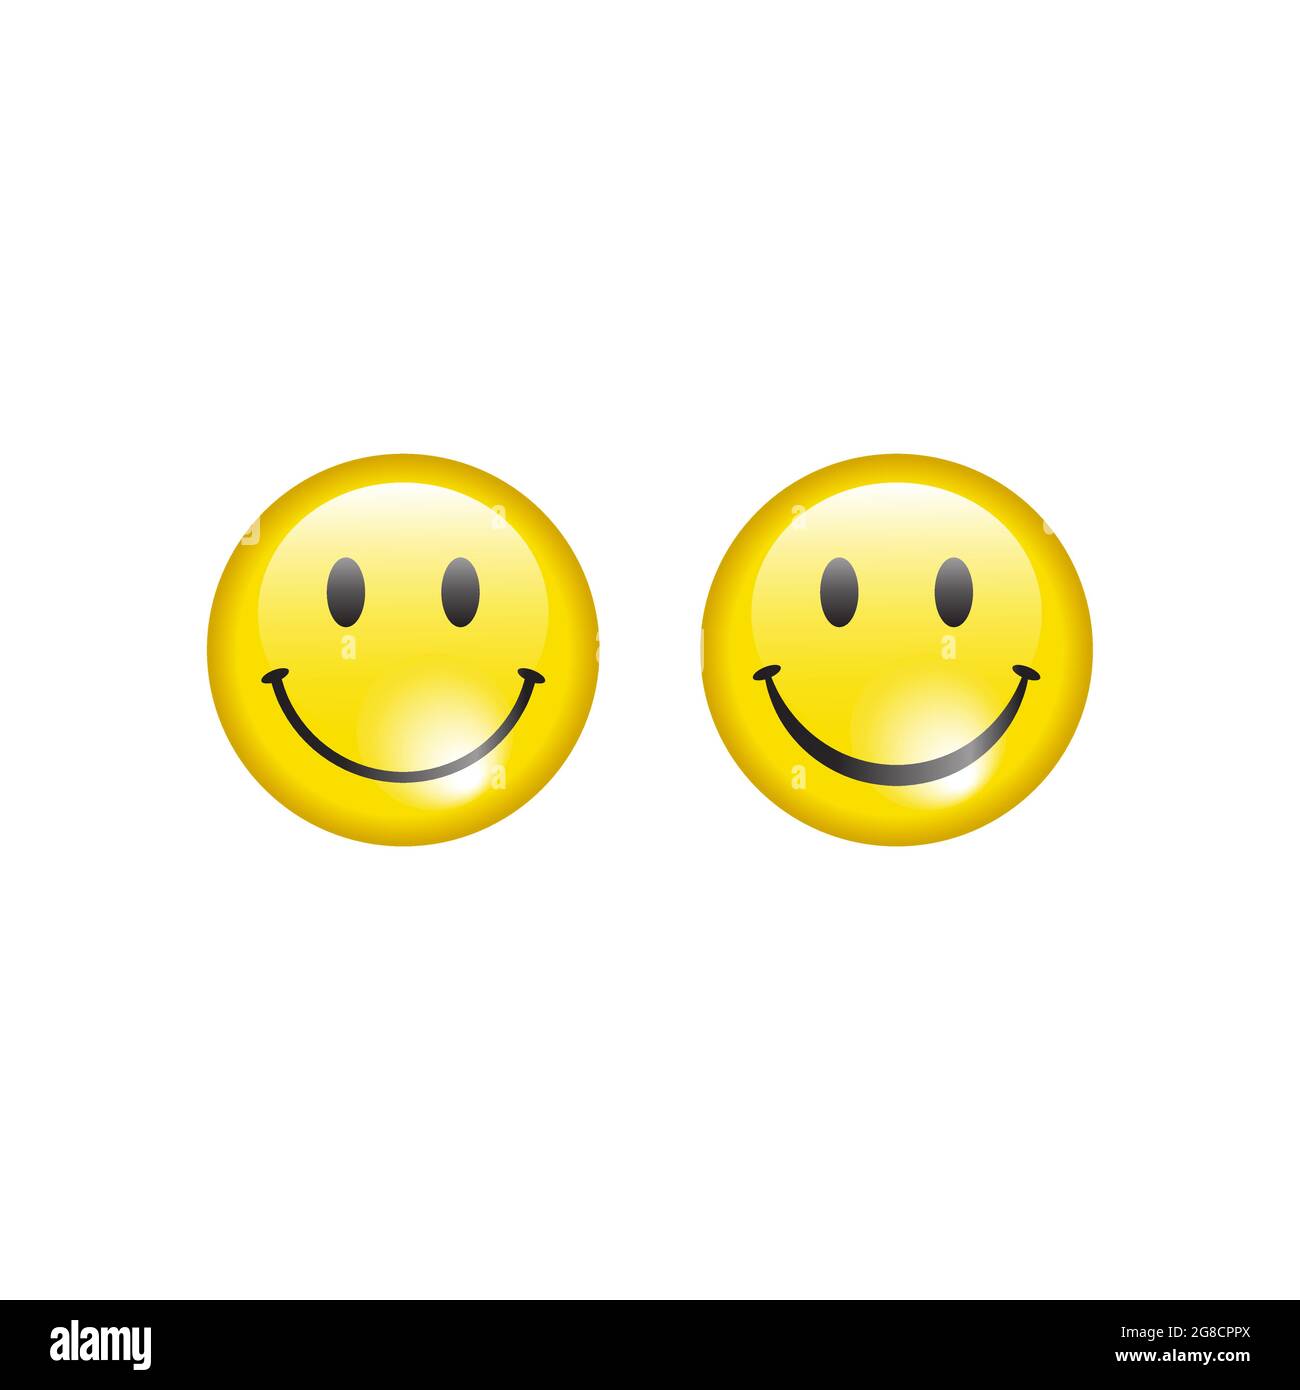 Smiling face yellow vector icon. Happy smile glossy and shiny emoji. Stock Vector